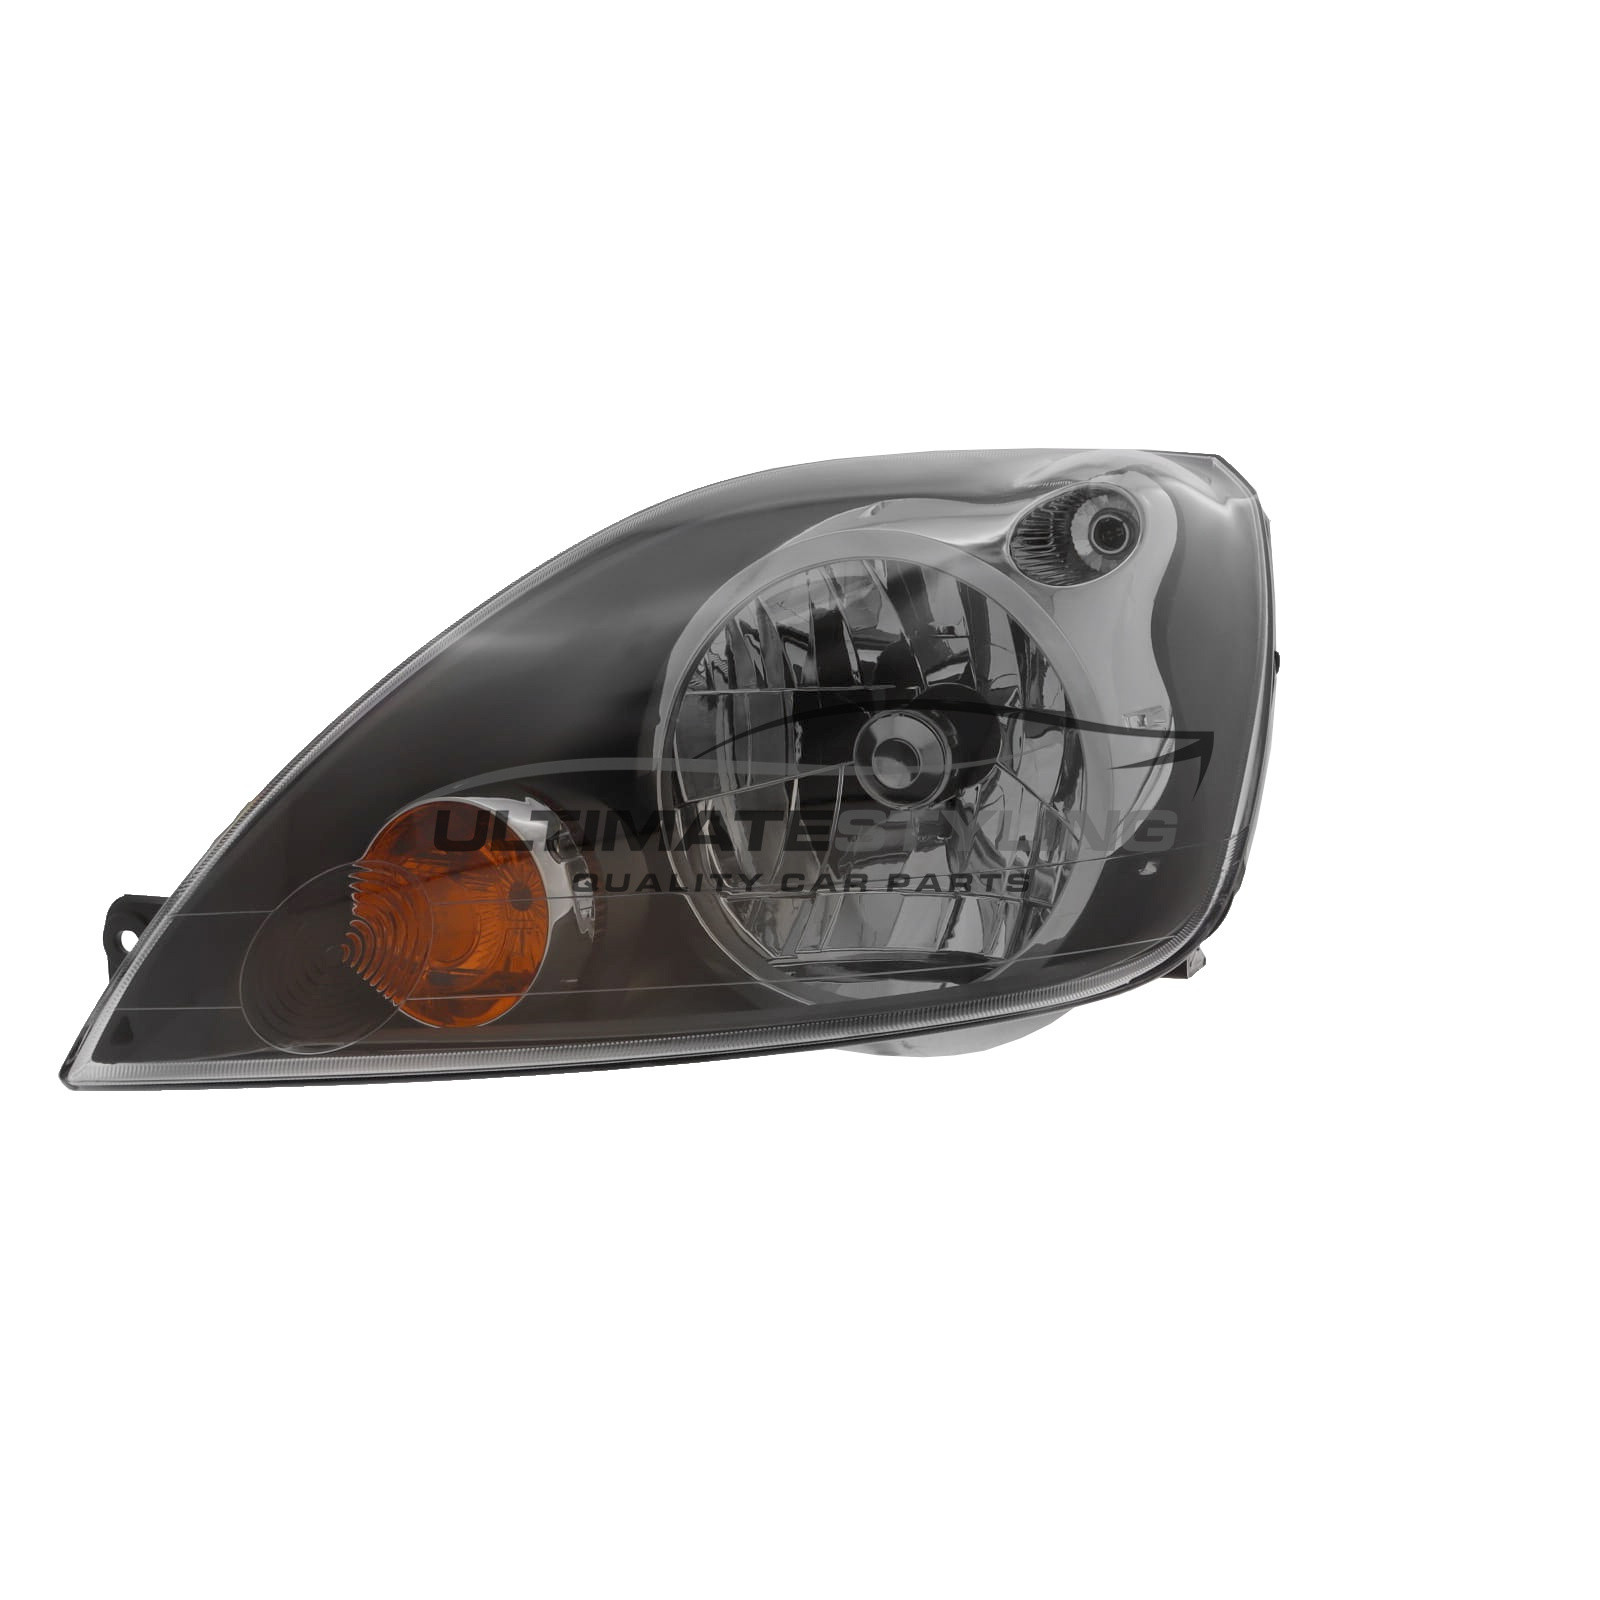 Ford Fiesta 2005-2009 Halogen, Electric With Motor, Grey Inner Headlight / Headlamp Including Amber Indicator Passengers Side (LH)